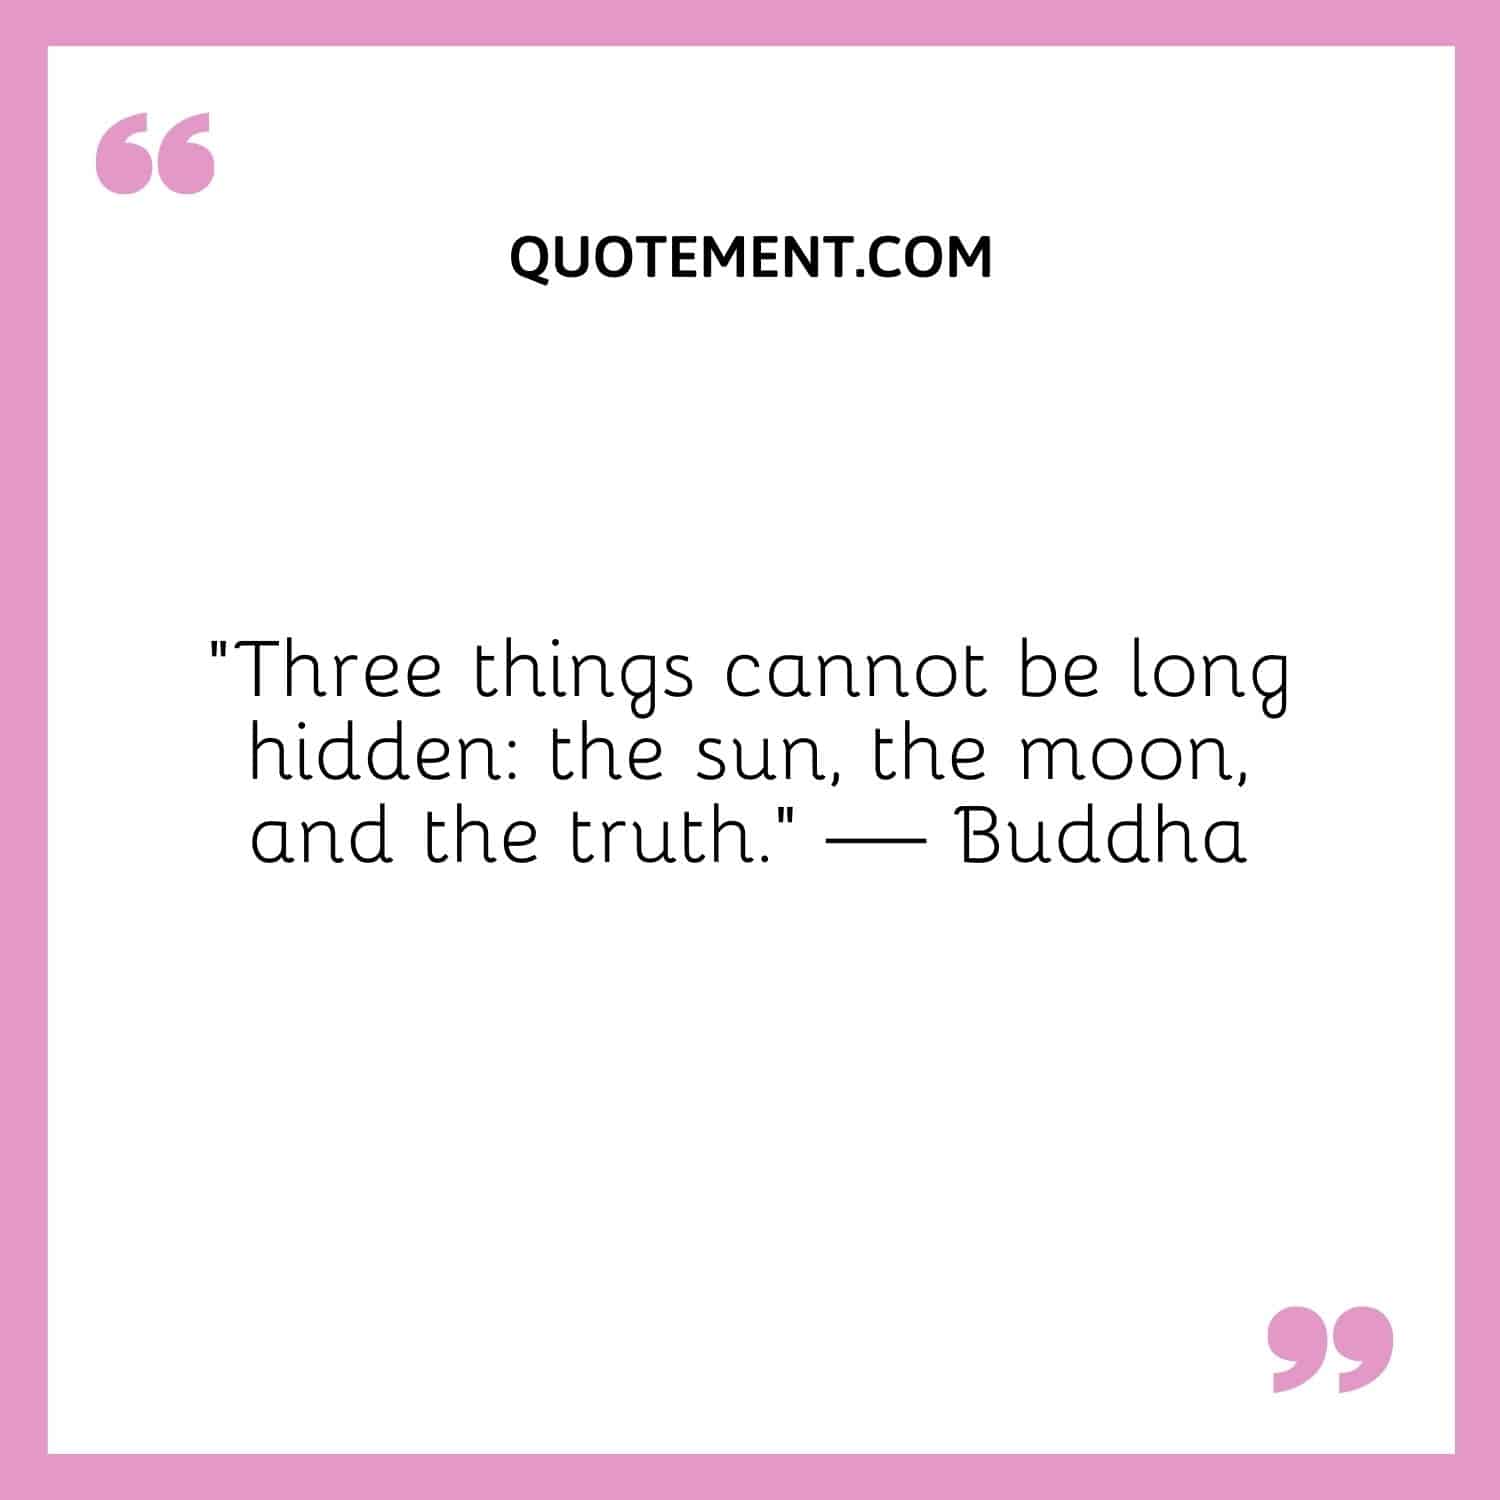 “Three things cannot be long hidden the sun, the moon, and the truth.” — Buddha